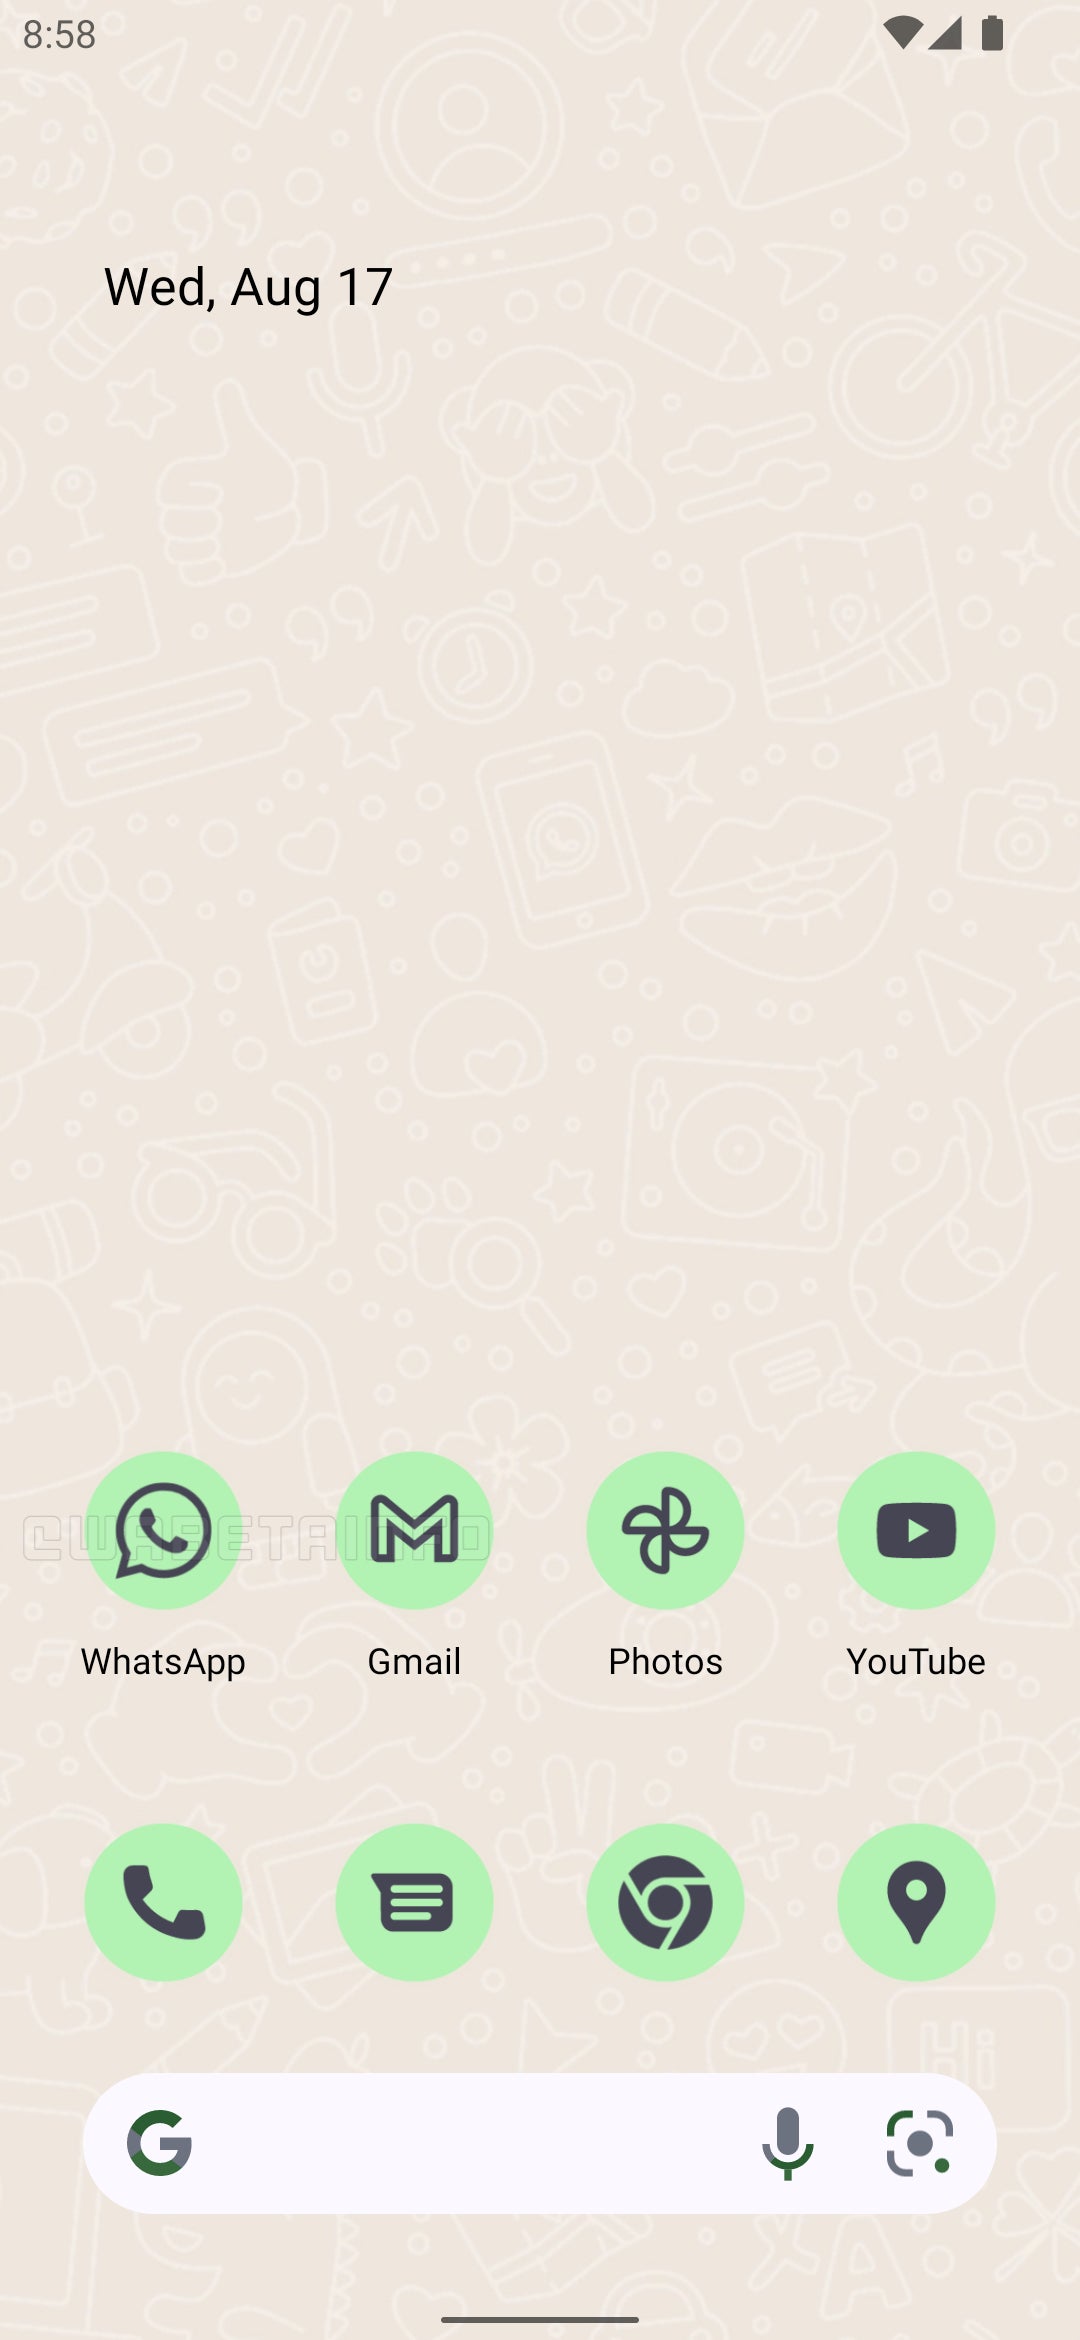 WhatsApp beta for Android now has Android 13's signature themed icon look